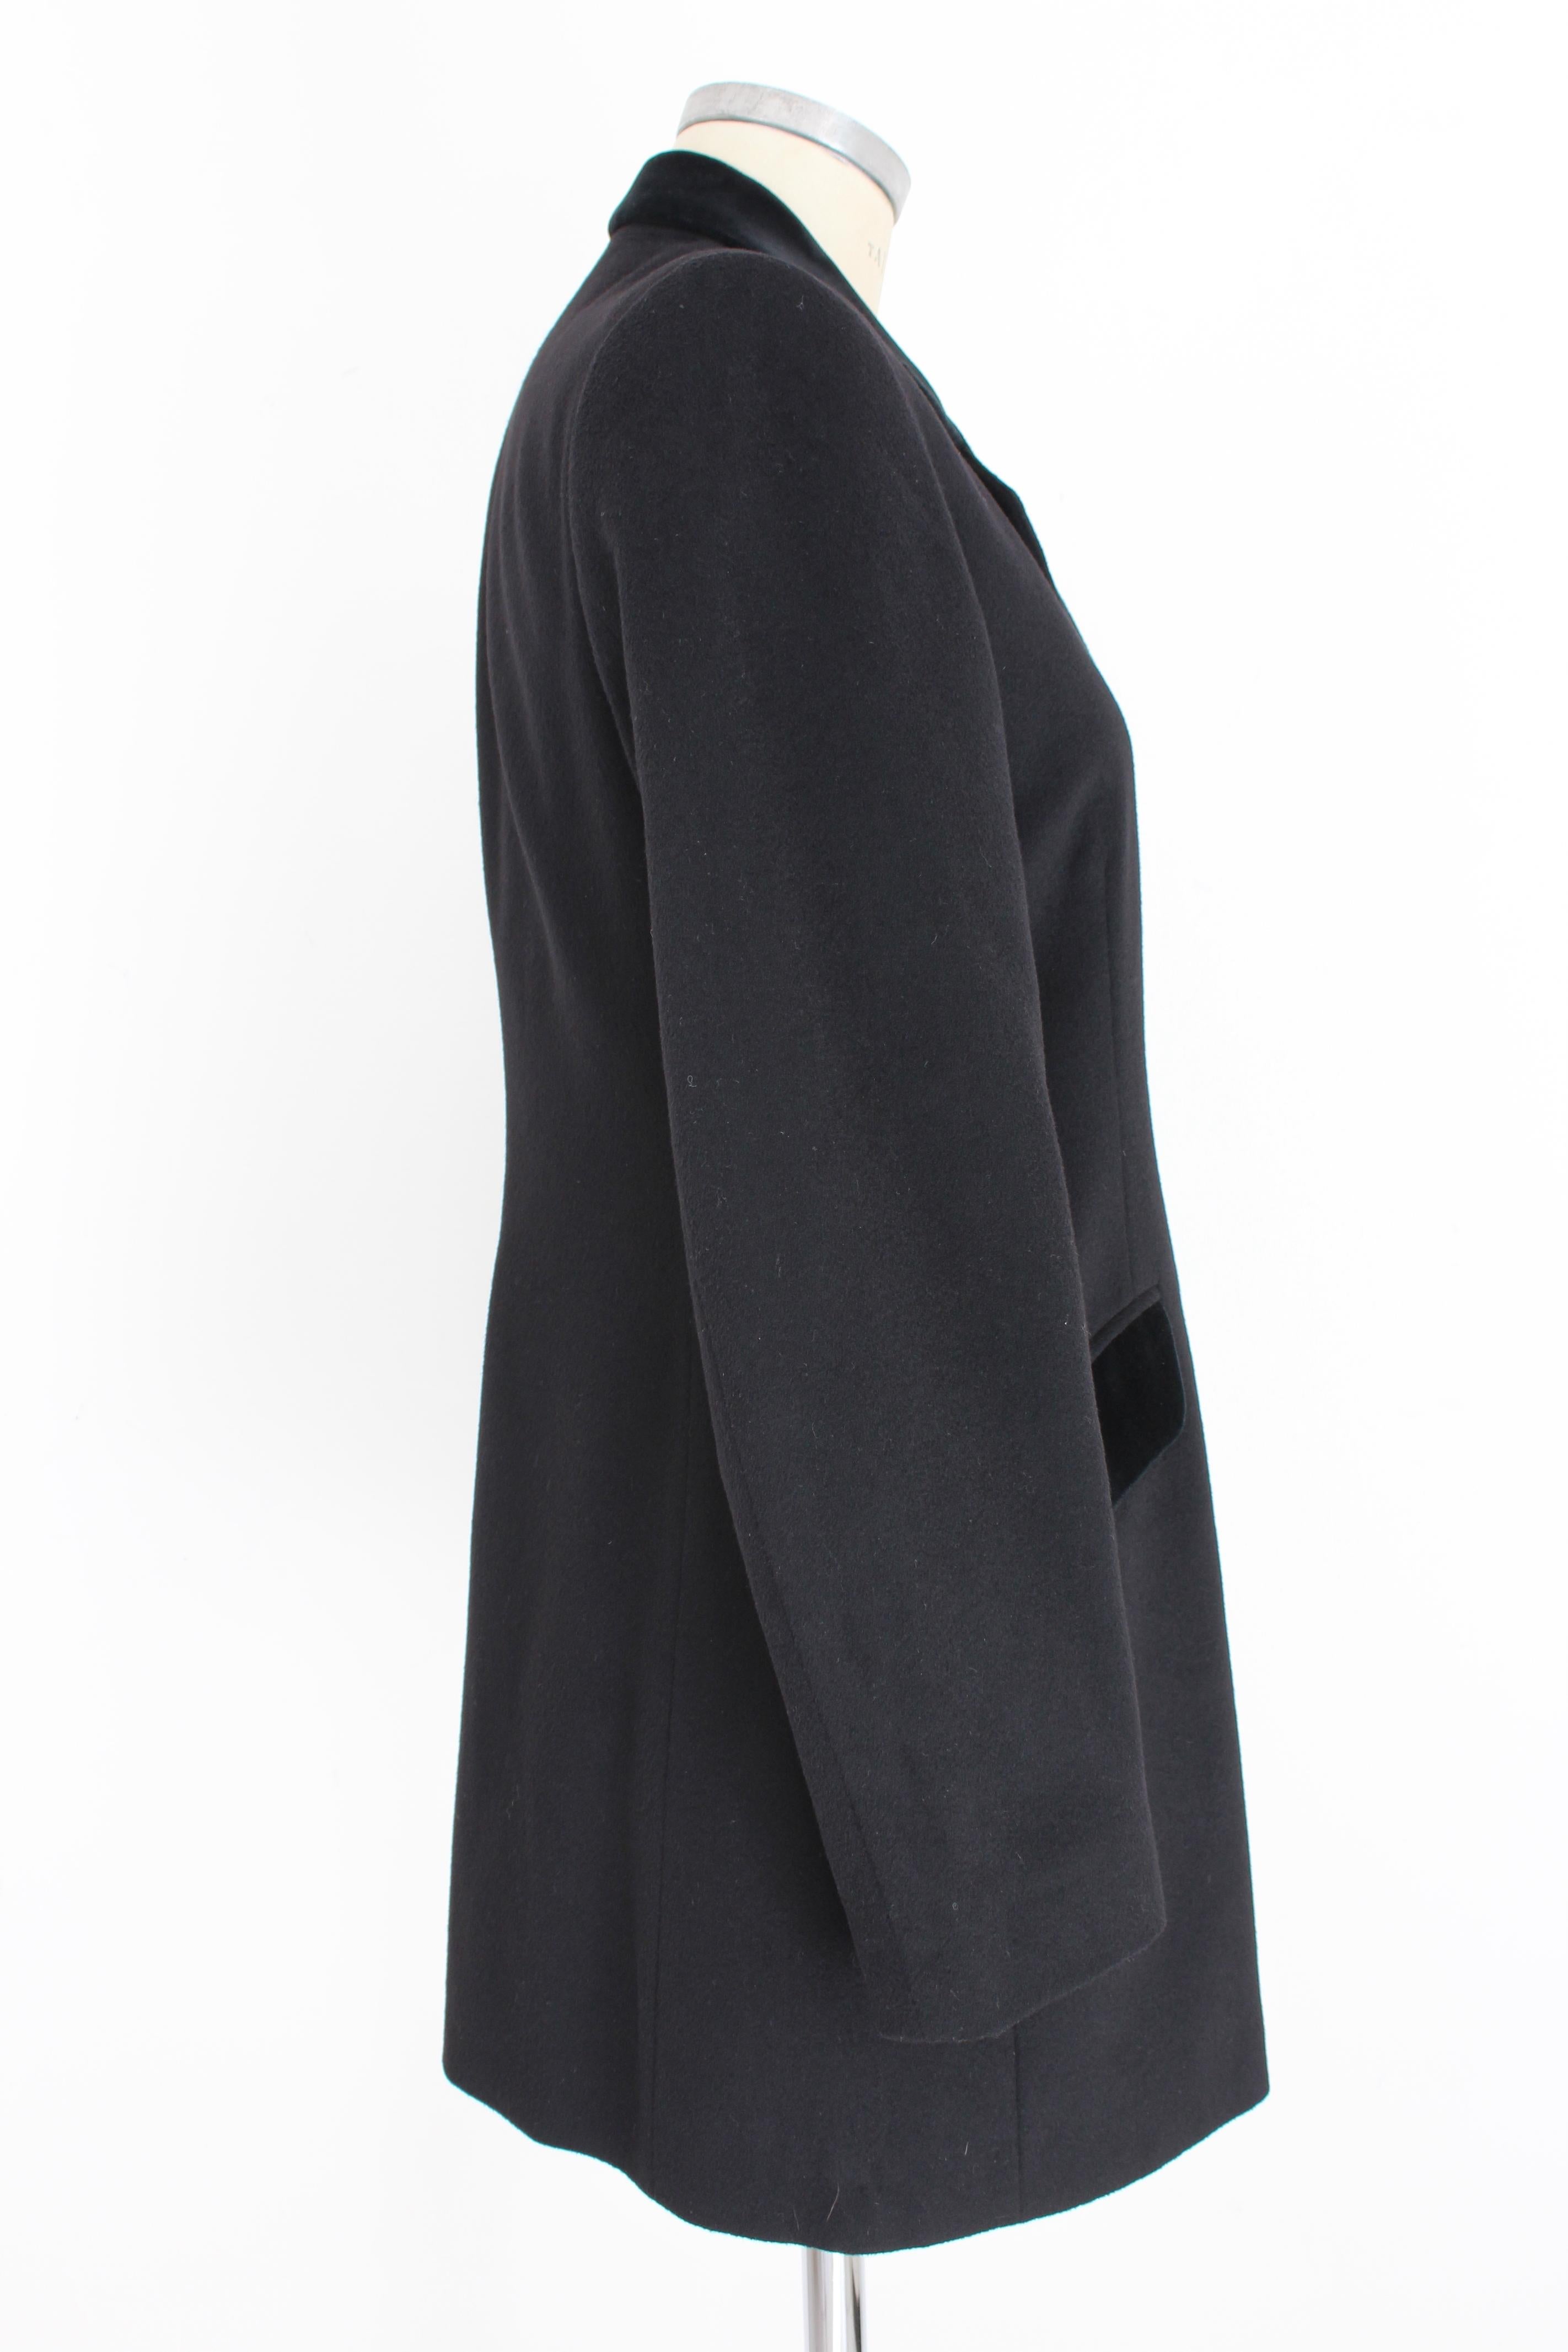 Alberto Biani for New York 90s vintage women's coat. Classic coat, black with velvet details on the neck and pockets, tone on tone. Loro Piana fabric, 75% wool, 25% cashmere. Made in Italy.

Condition: Excellent

Item used few times, it remains in